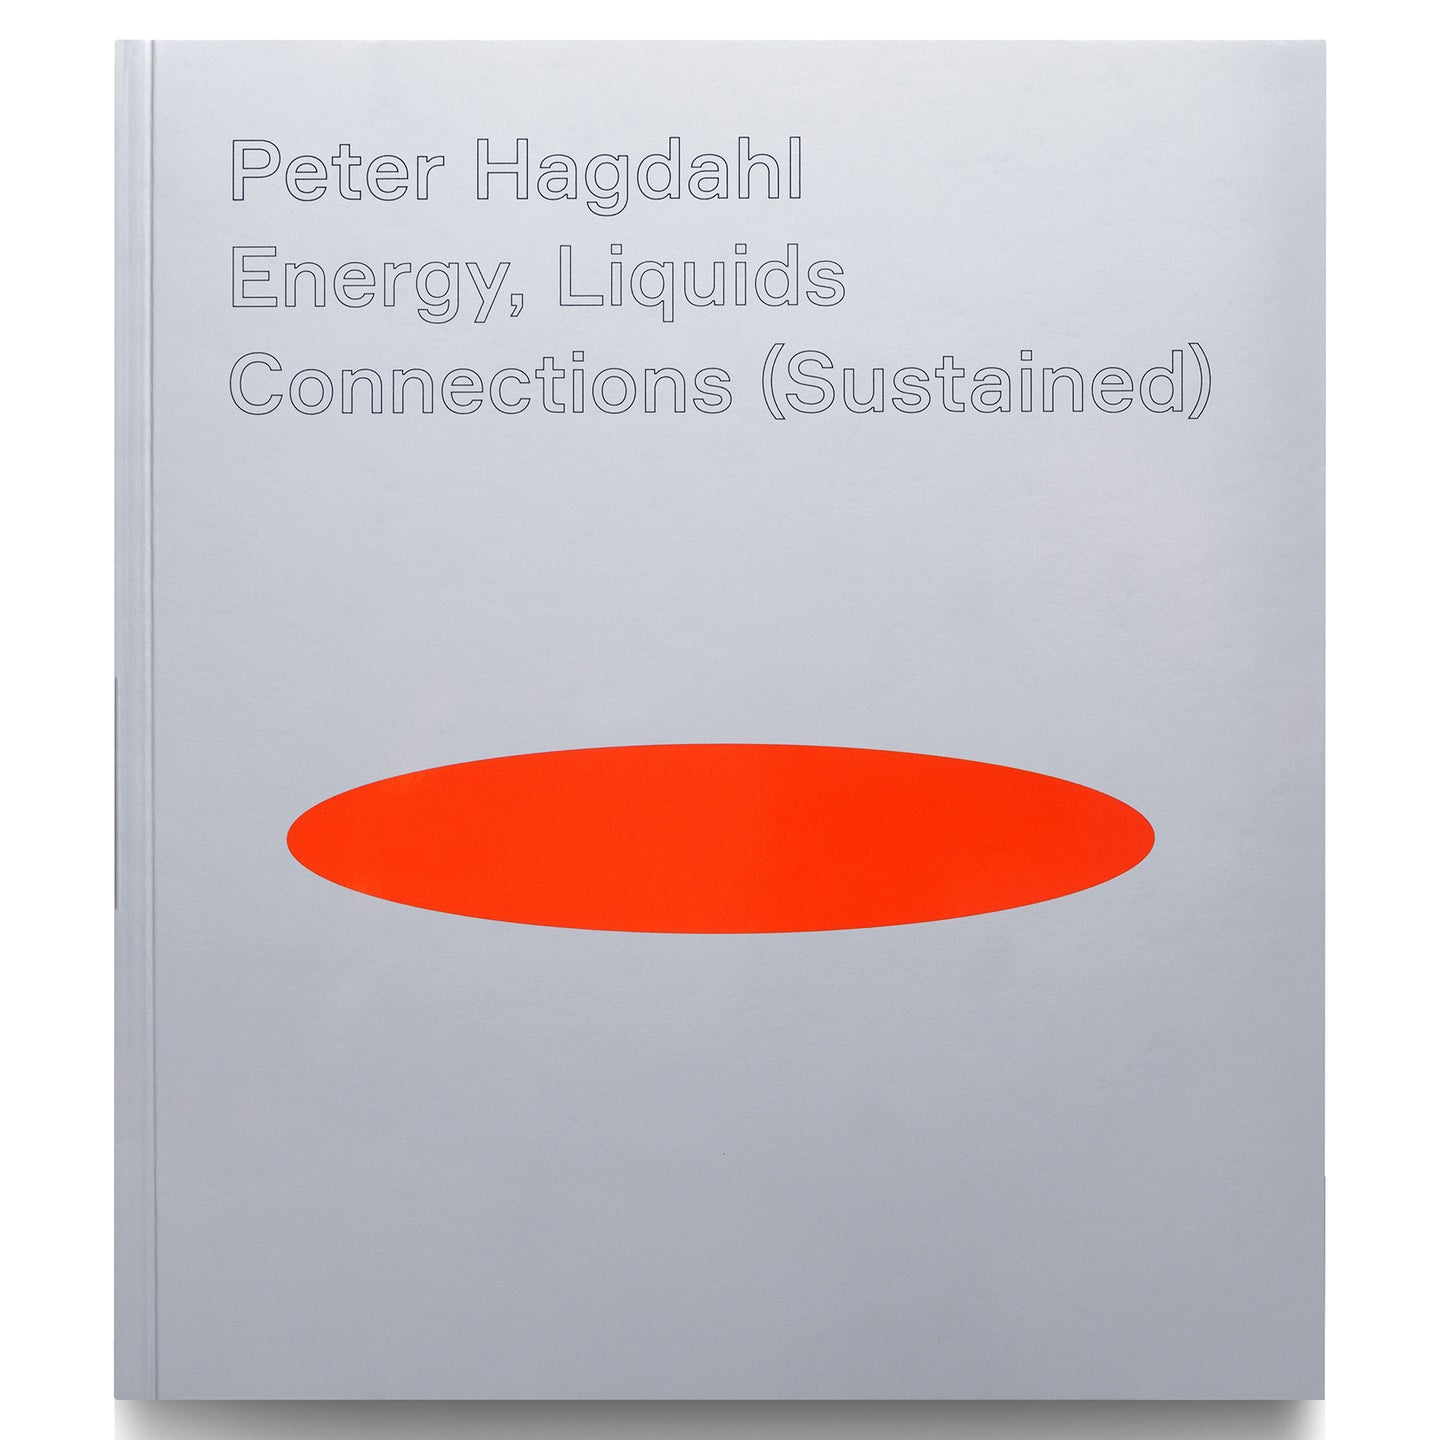 PETER HAGDAHL: ENERGY, LIQUIDS, CONNECTIONS (SUSTAINED)